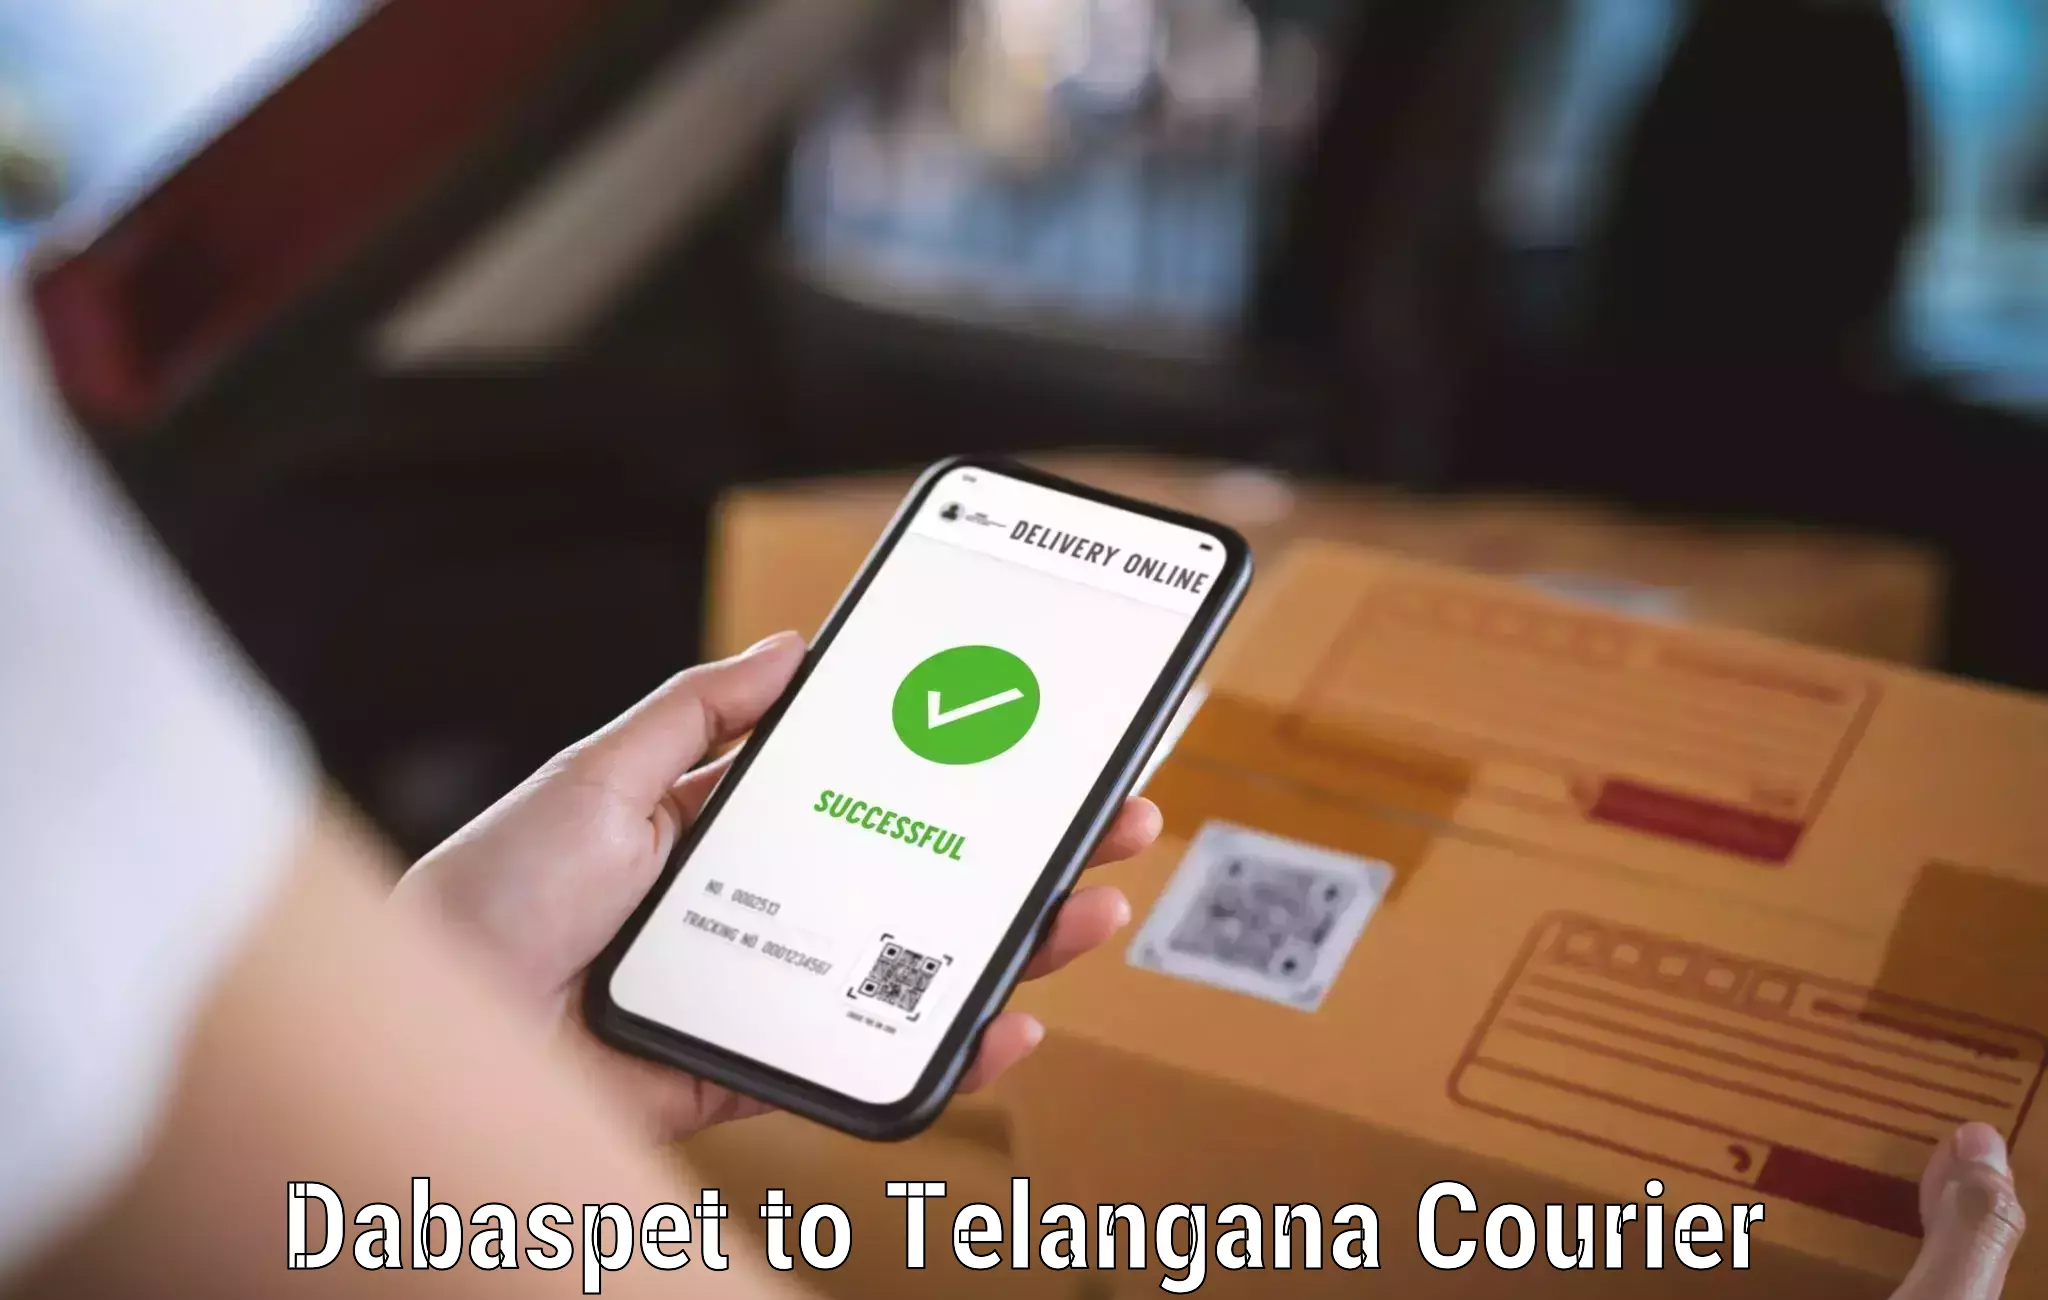 Business delivery service Dabaspet to Telangana